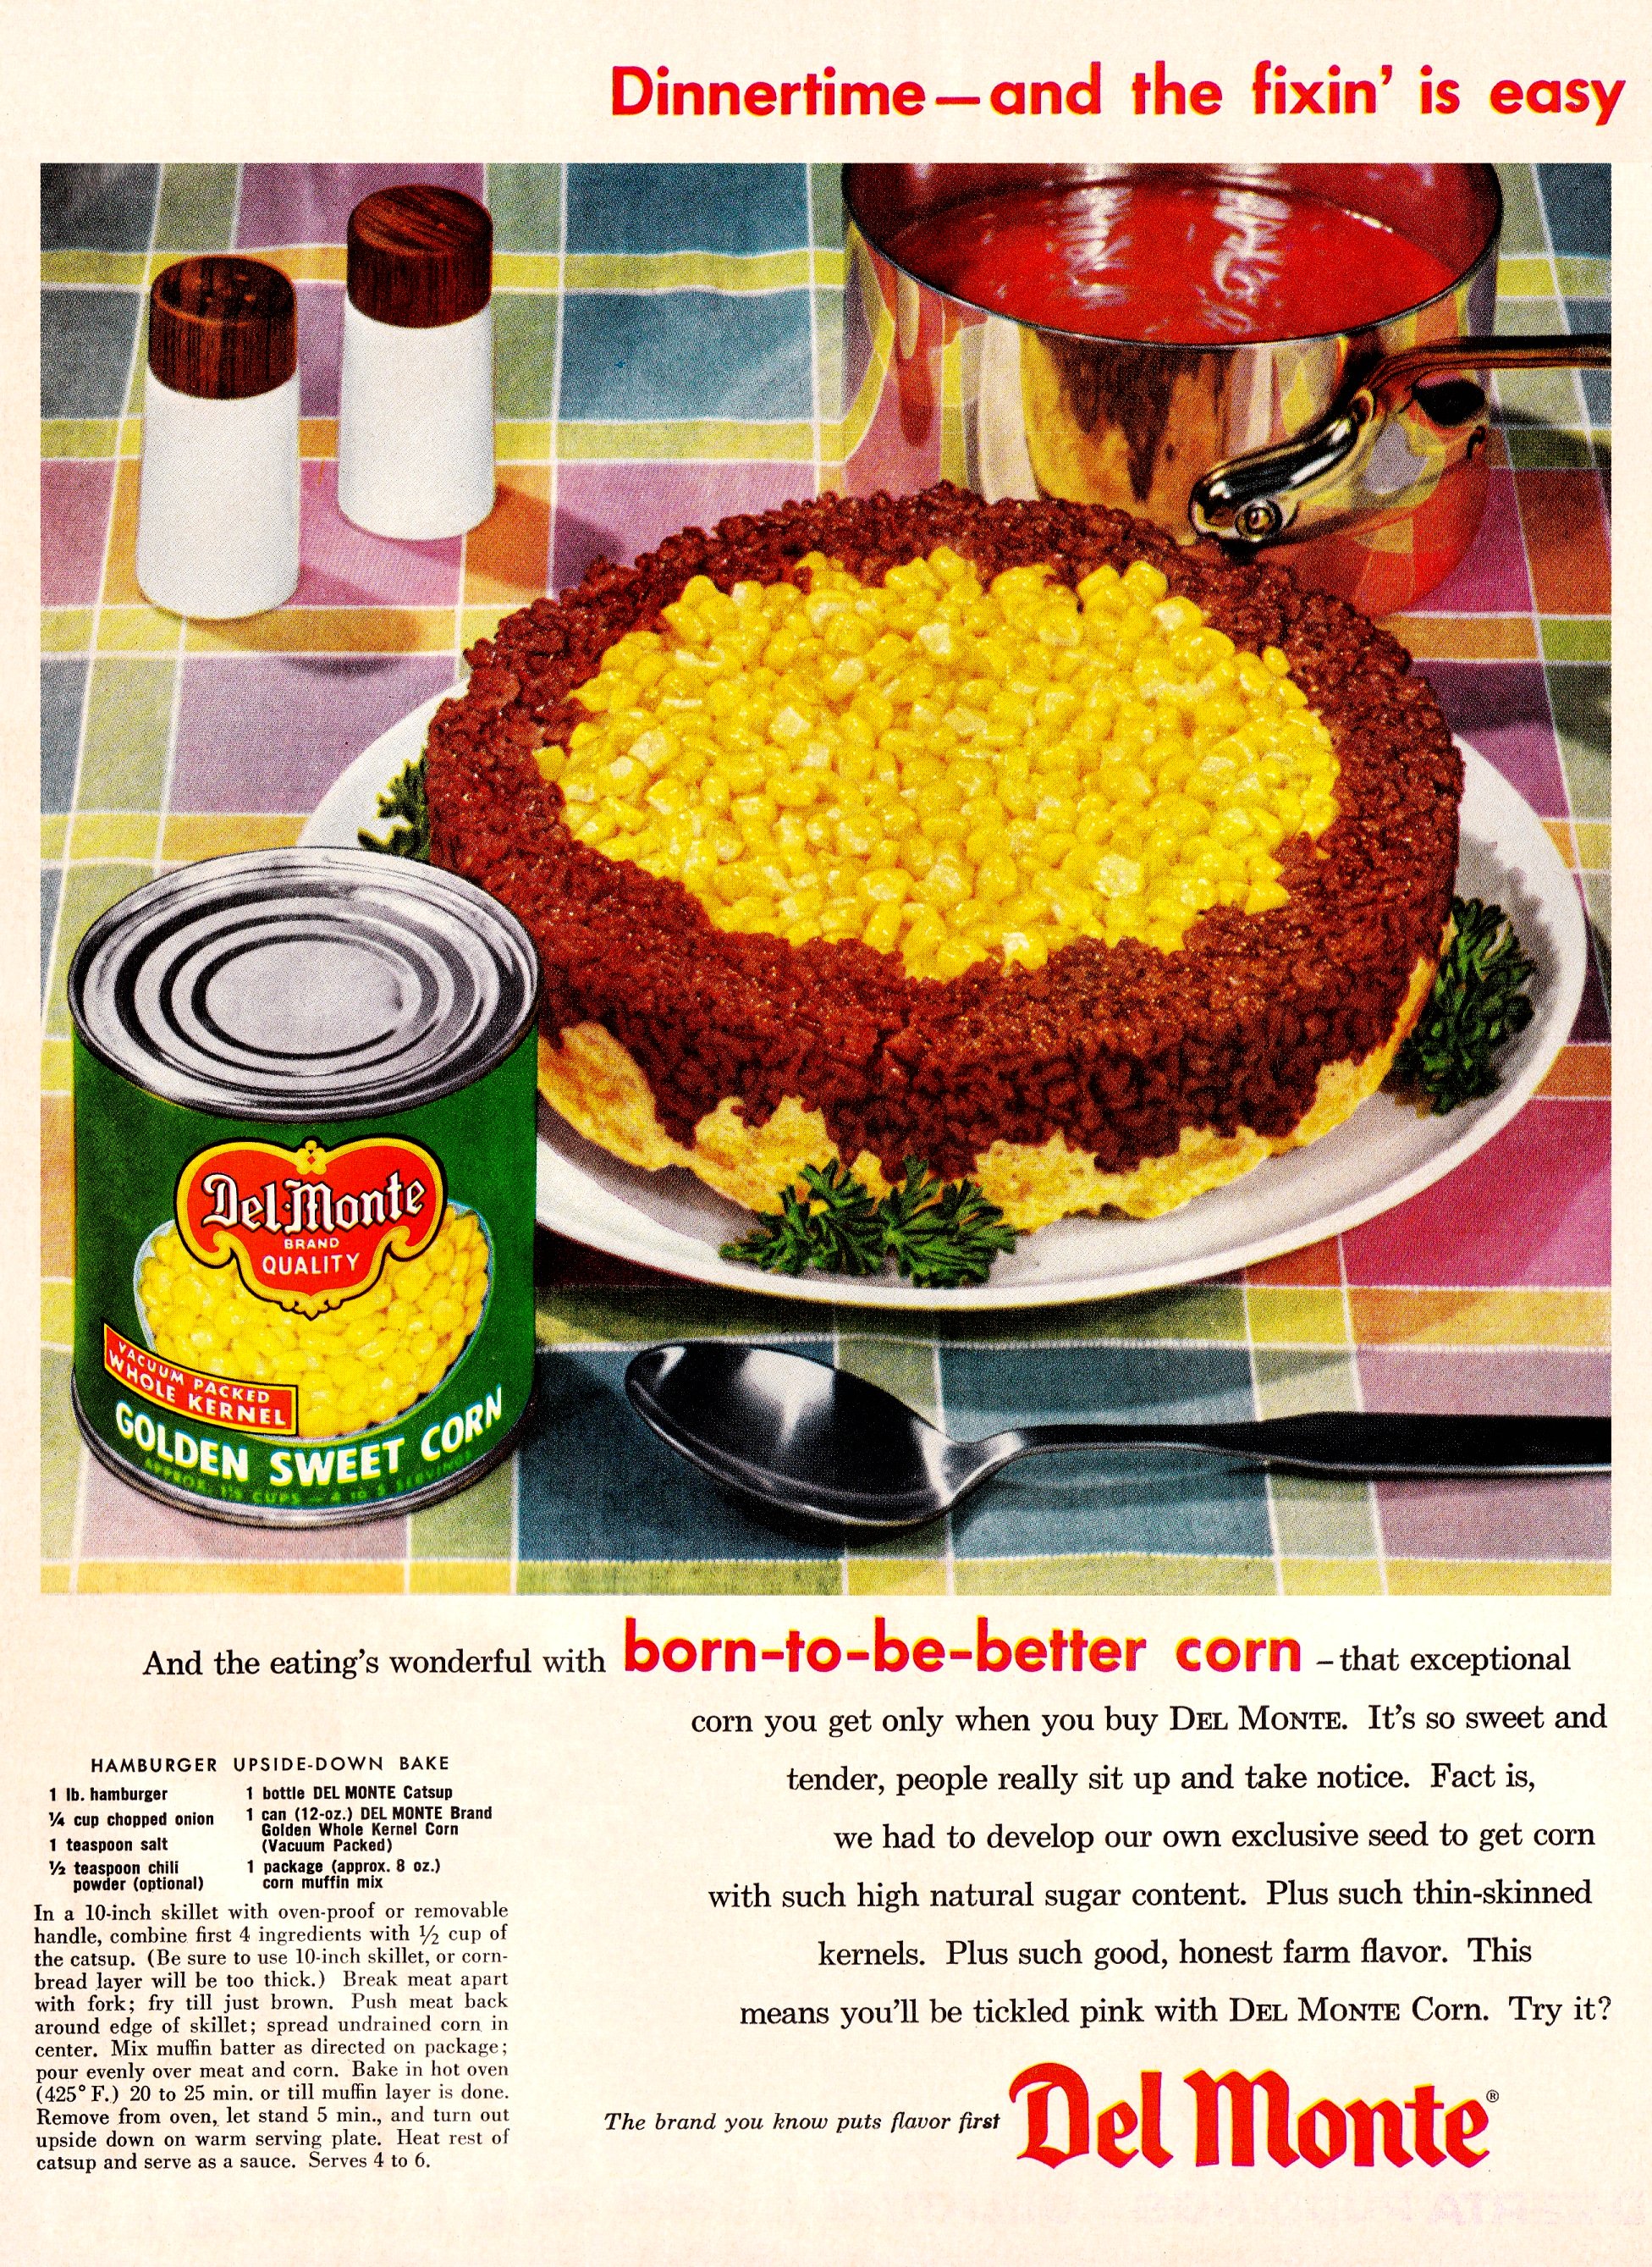 Del Monte - published in The American Home - May 1956